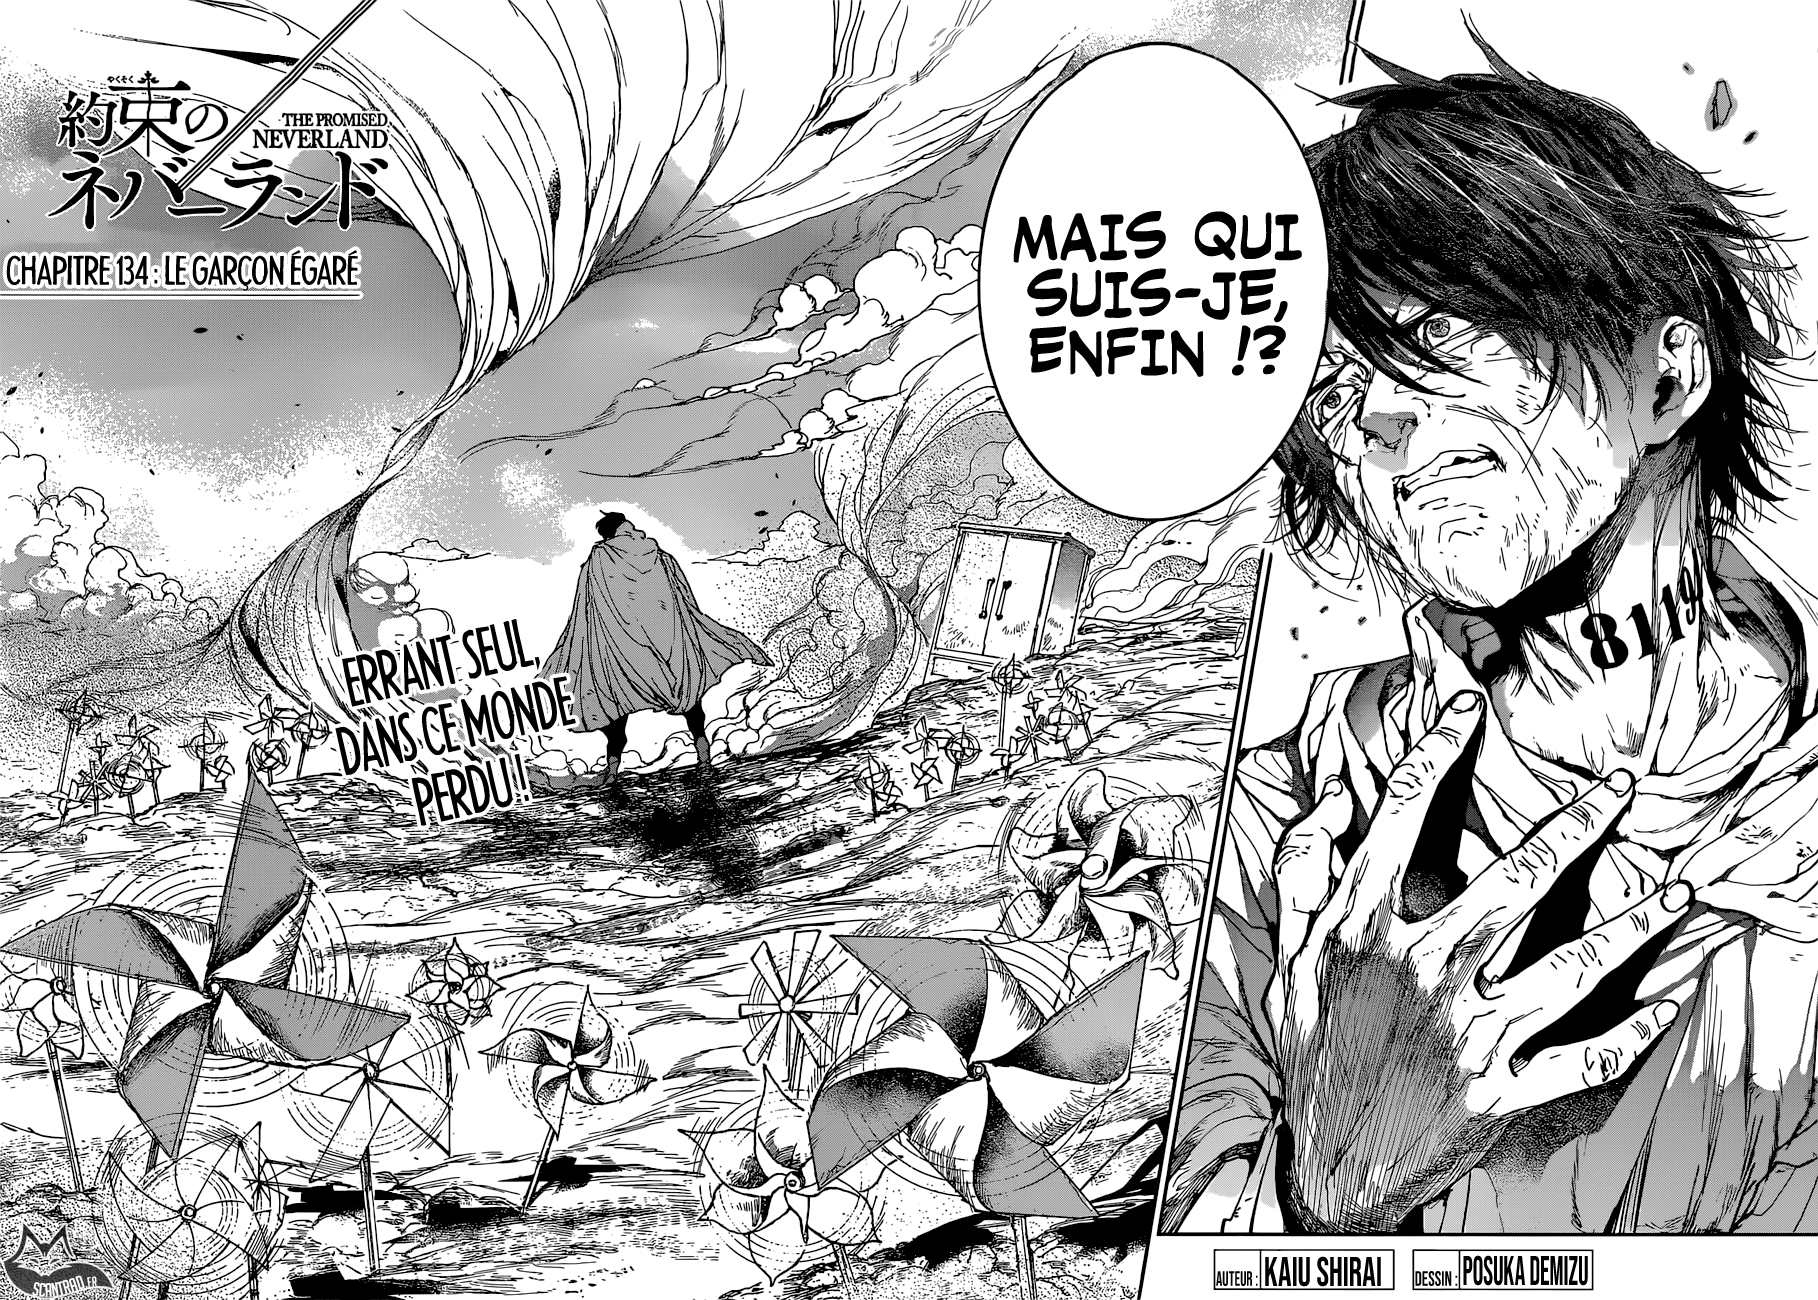 The Promised Neverland: Chapter chapitre-134 - Page 2